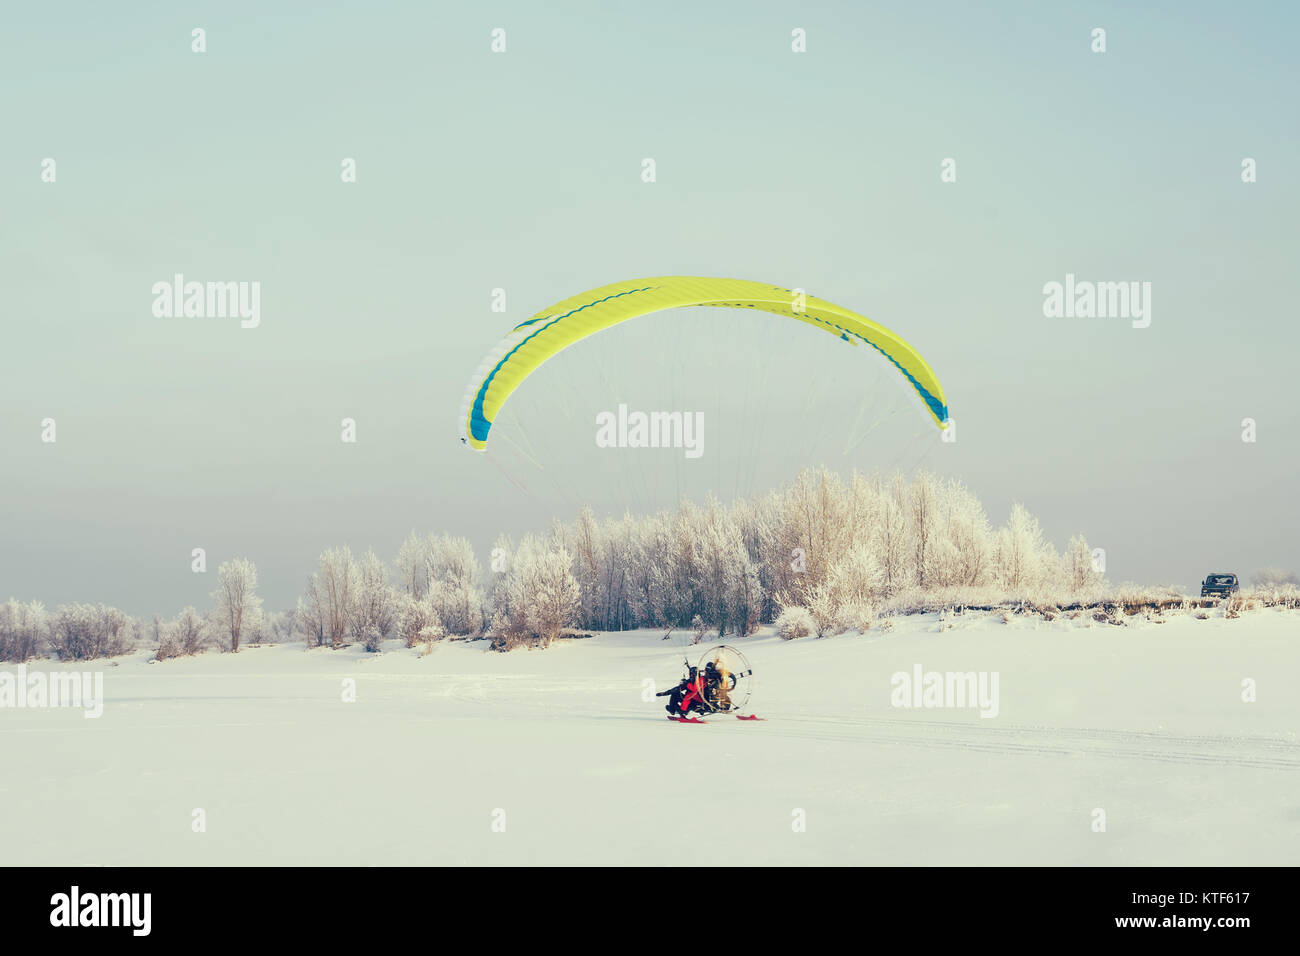 Adventure man active extreme sports pilot flying with paramotor paraglider paraglider motor. Moto paraglider prepares for takeoff with a snow surface Stock Photo